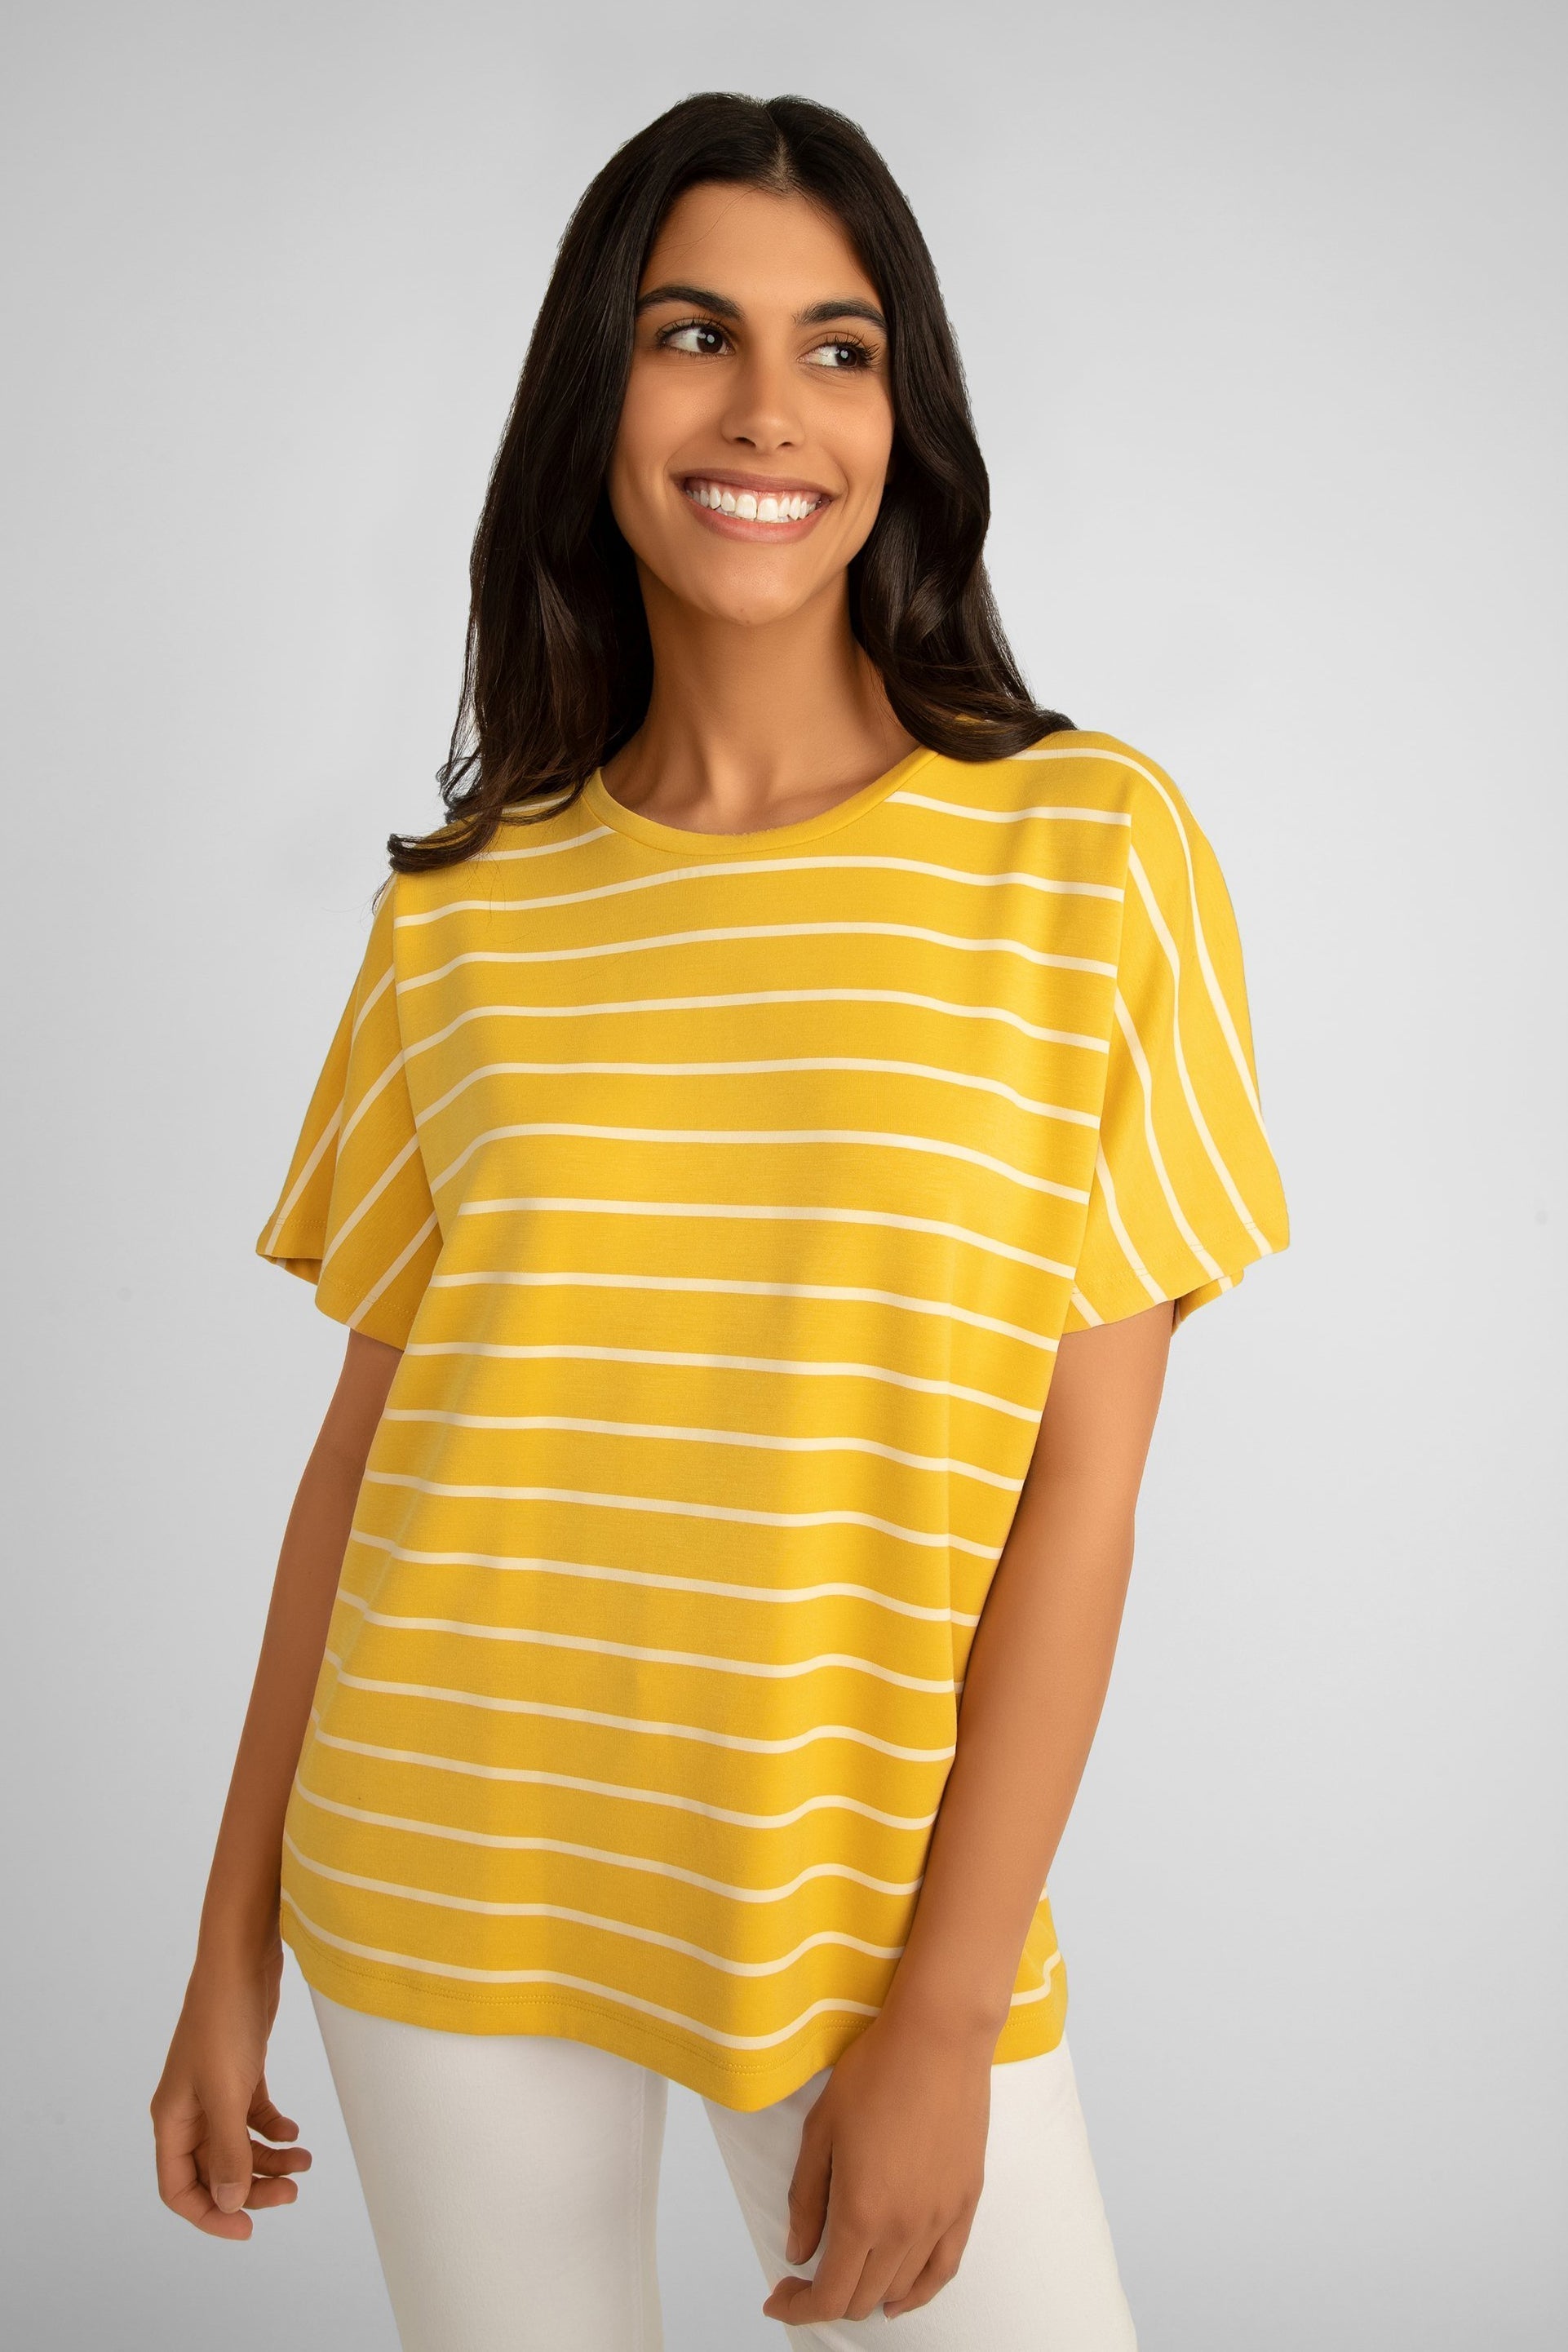 Soya Concept (26540) Women's Short Raglan Sleeve Stripes T-Shirt in Yellow with White Stripes